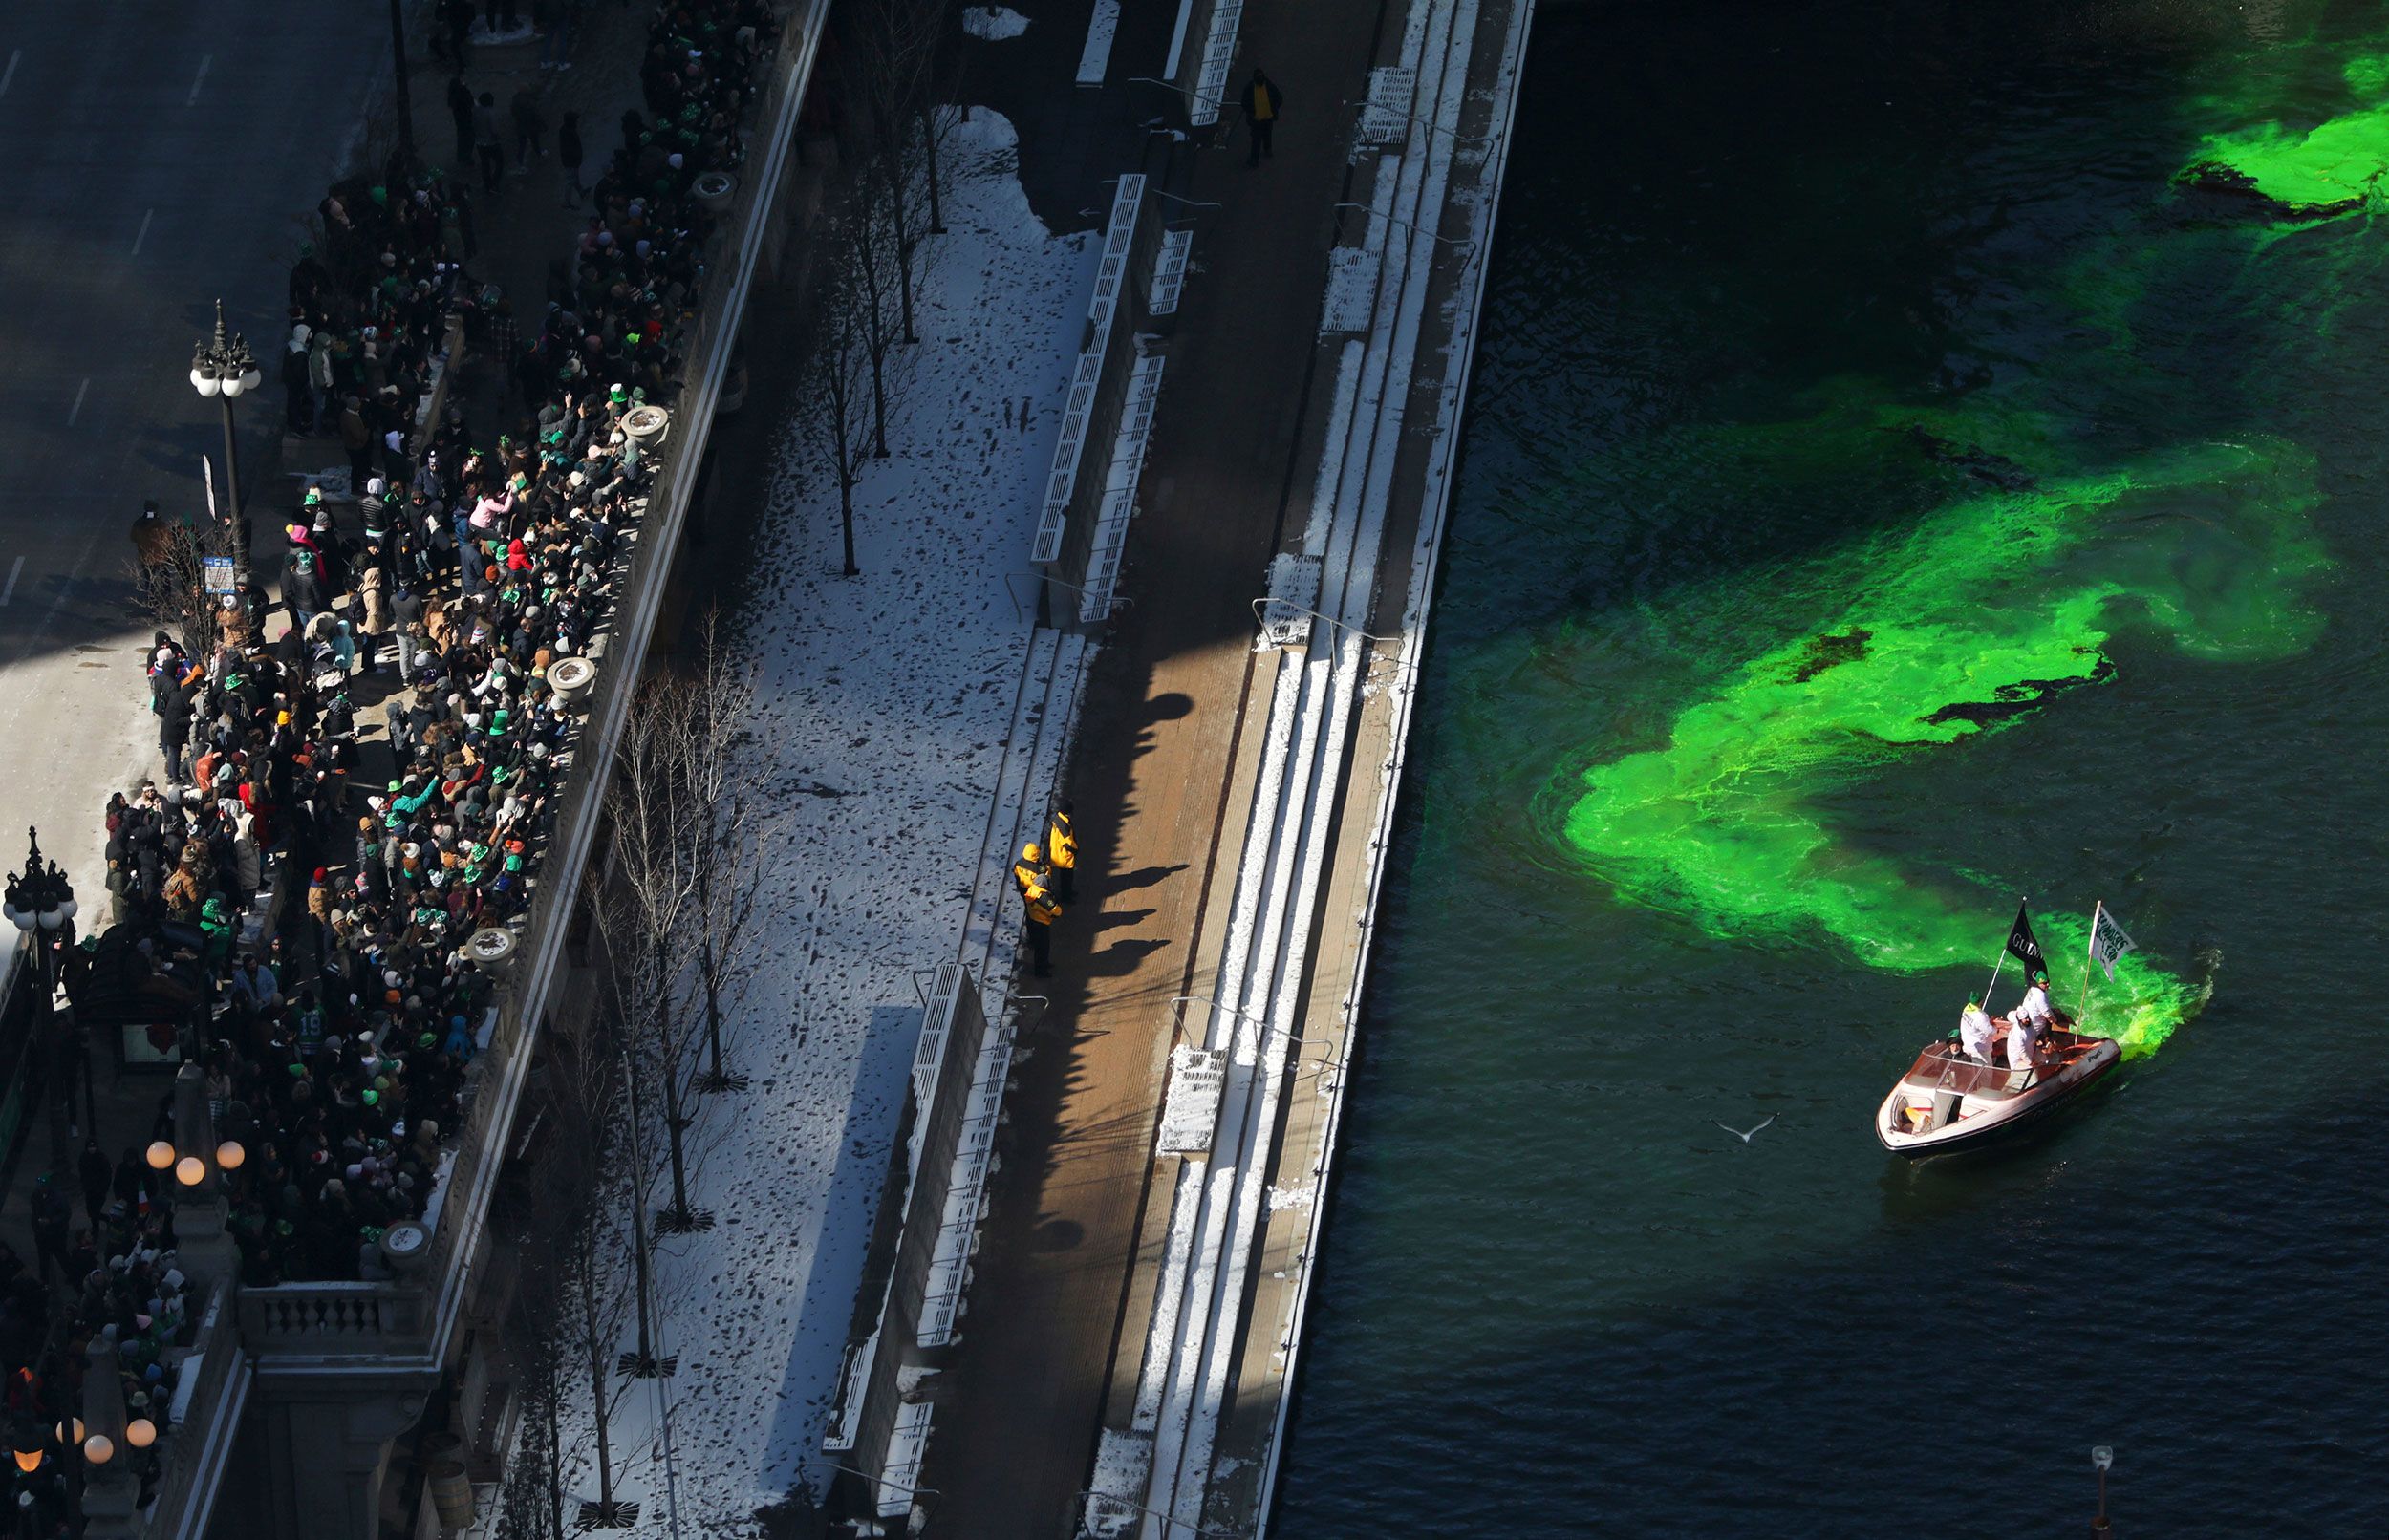 St. Patrick's Day: Why Chicago dyes its river green for the